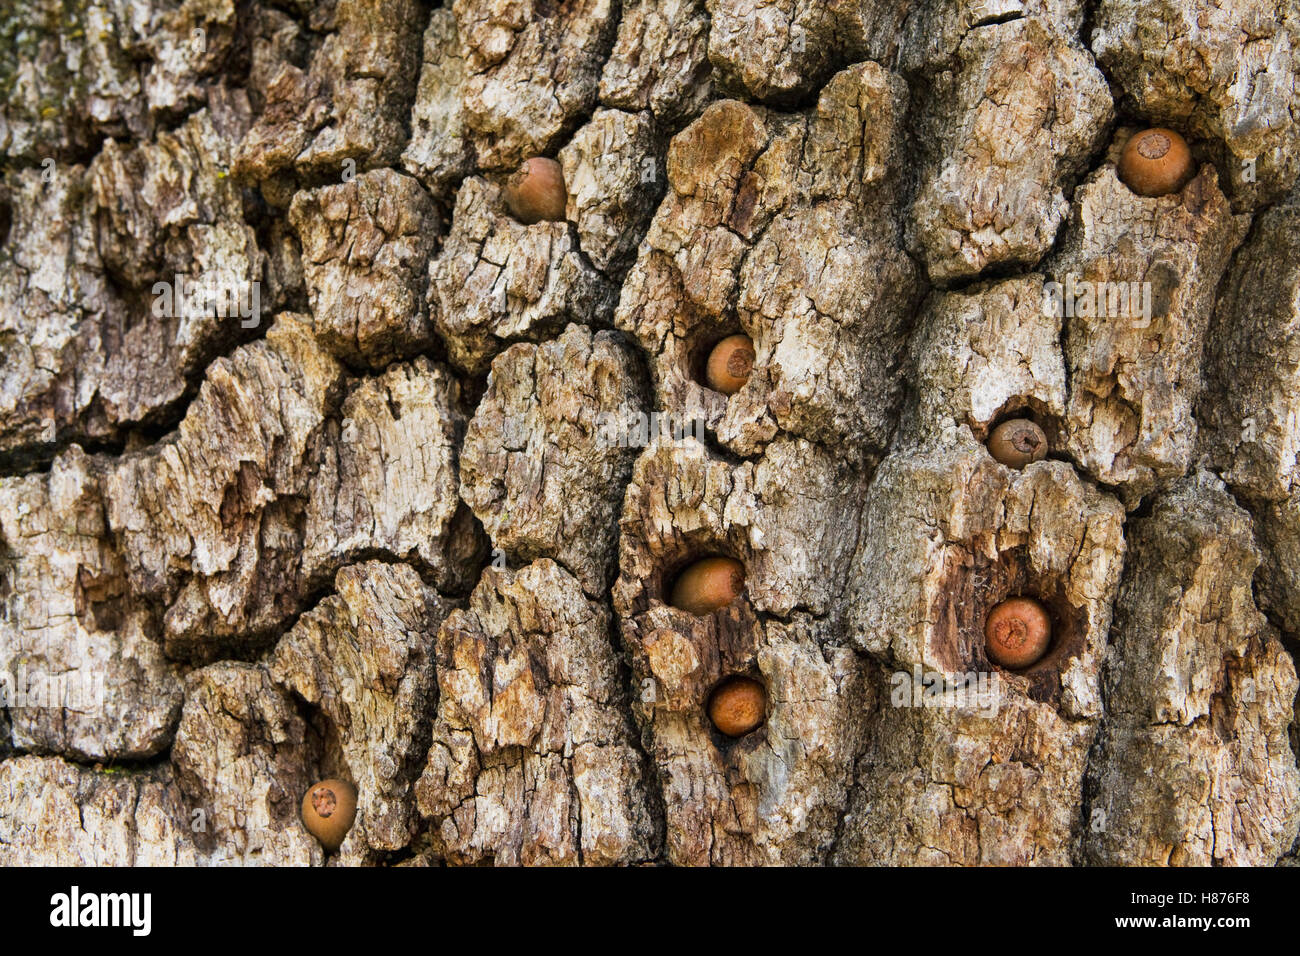 Oak (Quercus sp) branch, part of a granary tree, with acorns placed there by Acorn Woodpeckers (Melanerpes formicivorus), Blue Stock Photo